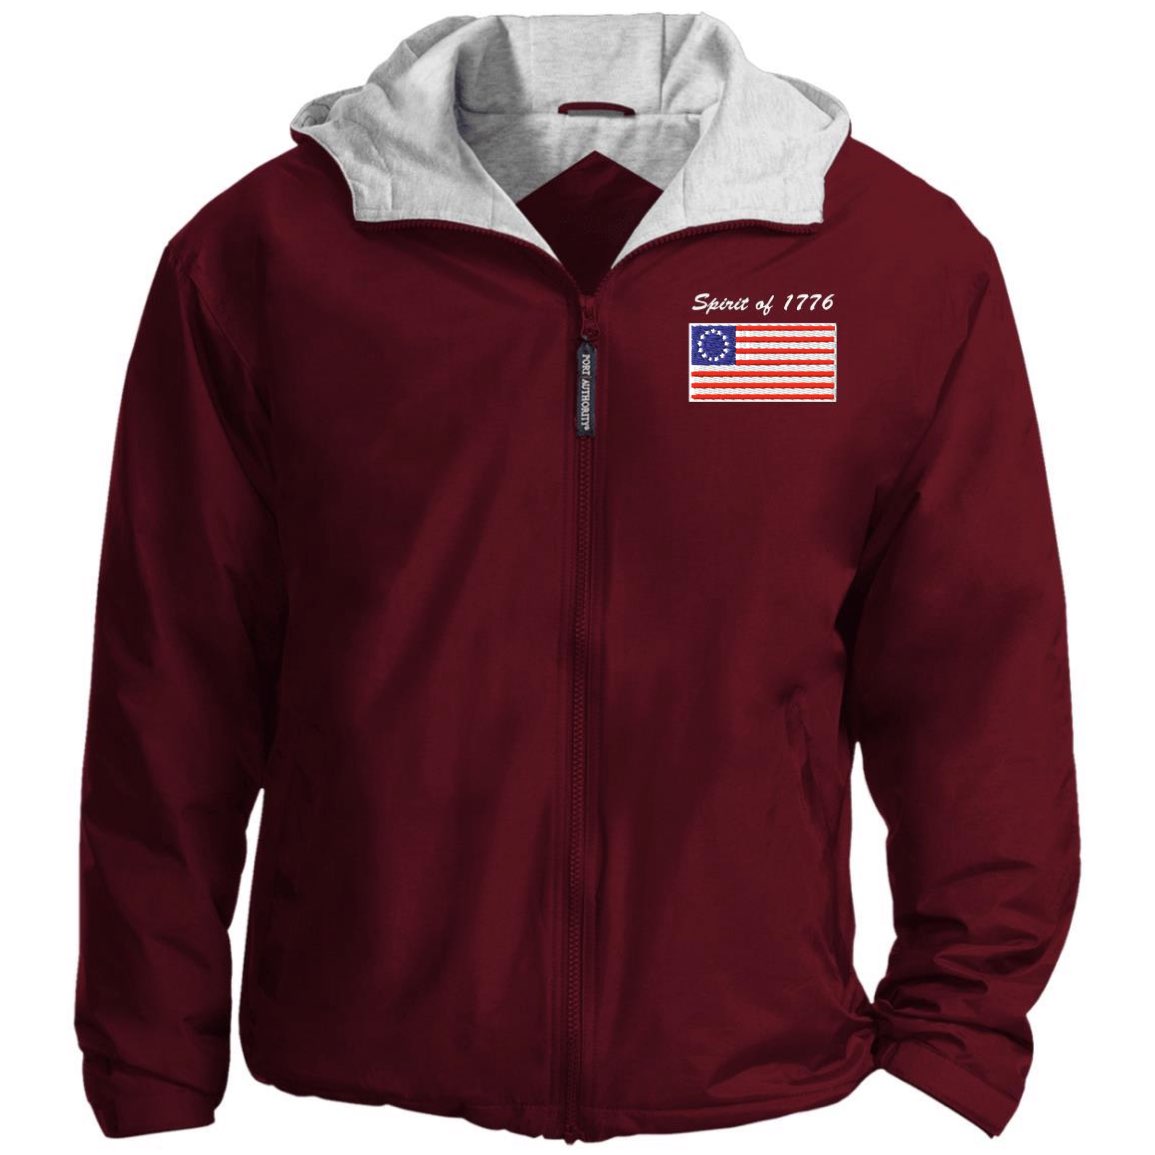 Spirit of 1776 Port Authority Team Jacket Hoodie Embroidered - Mercantile Mountain